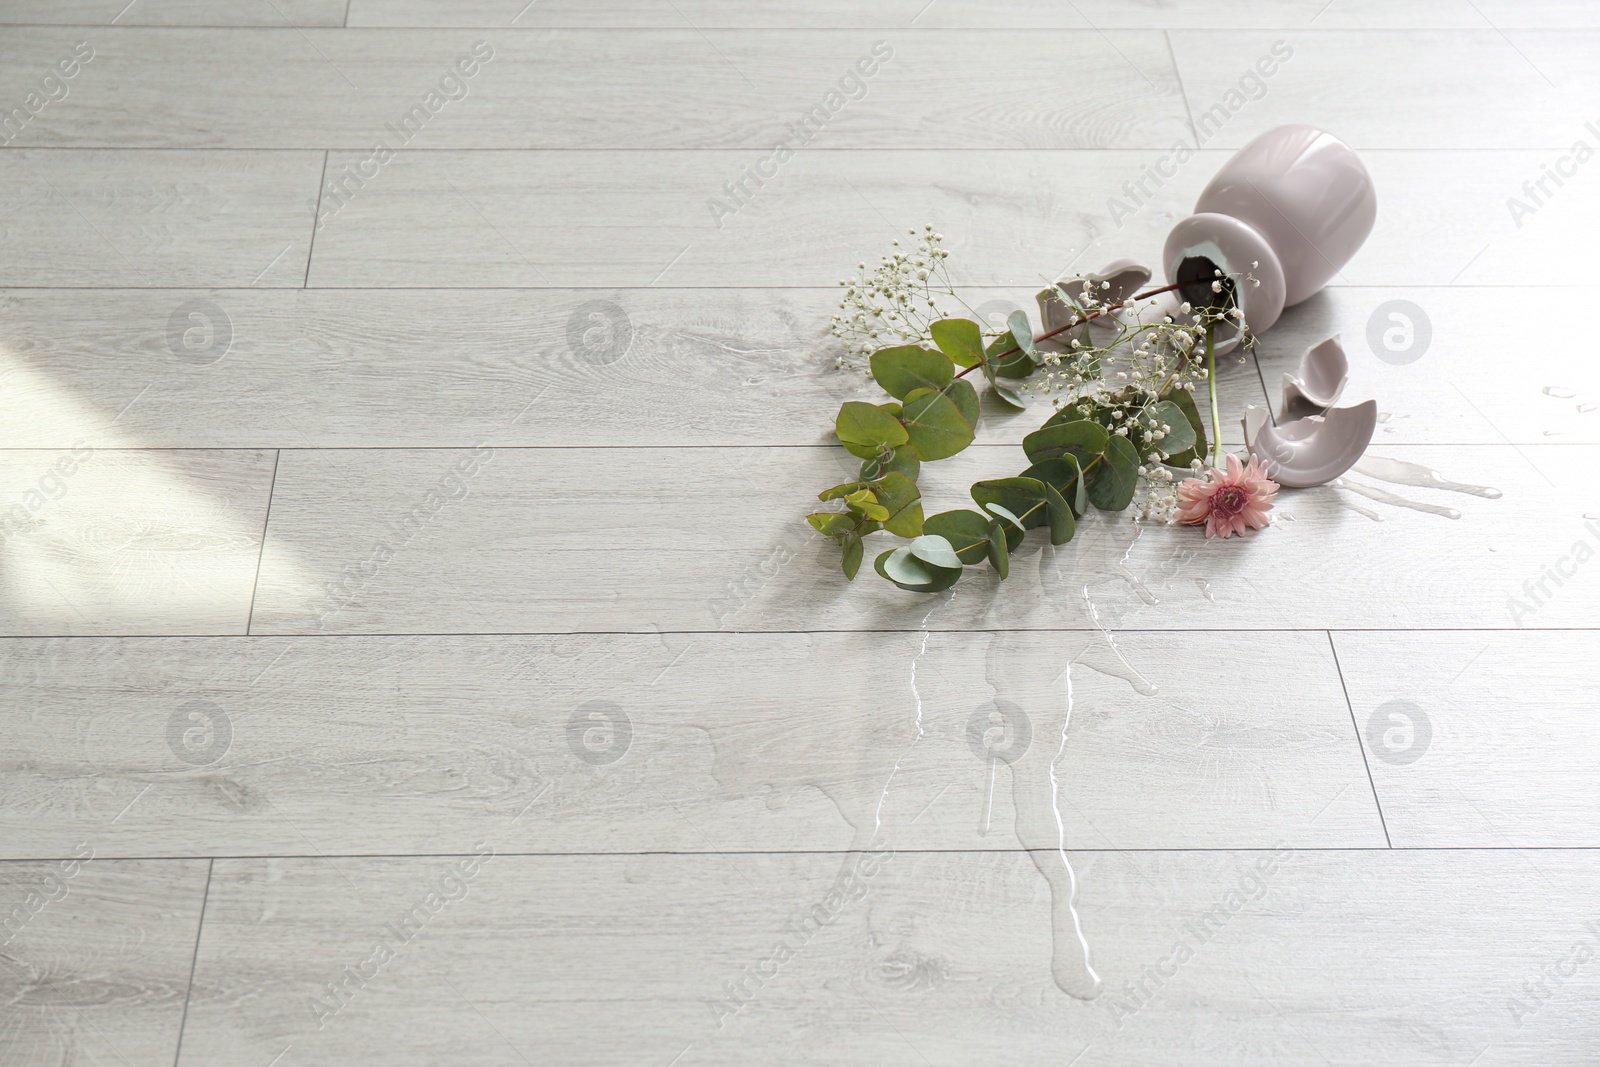 Photo of Broken pink ceramic vase and bouquet on wooden floor. Space for text